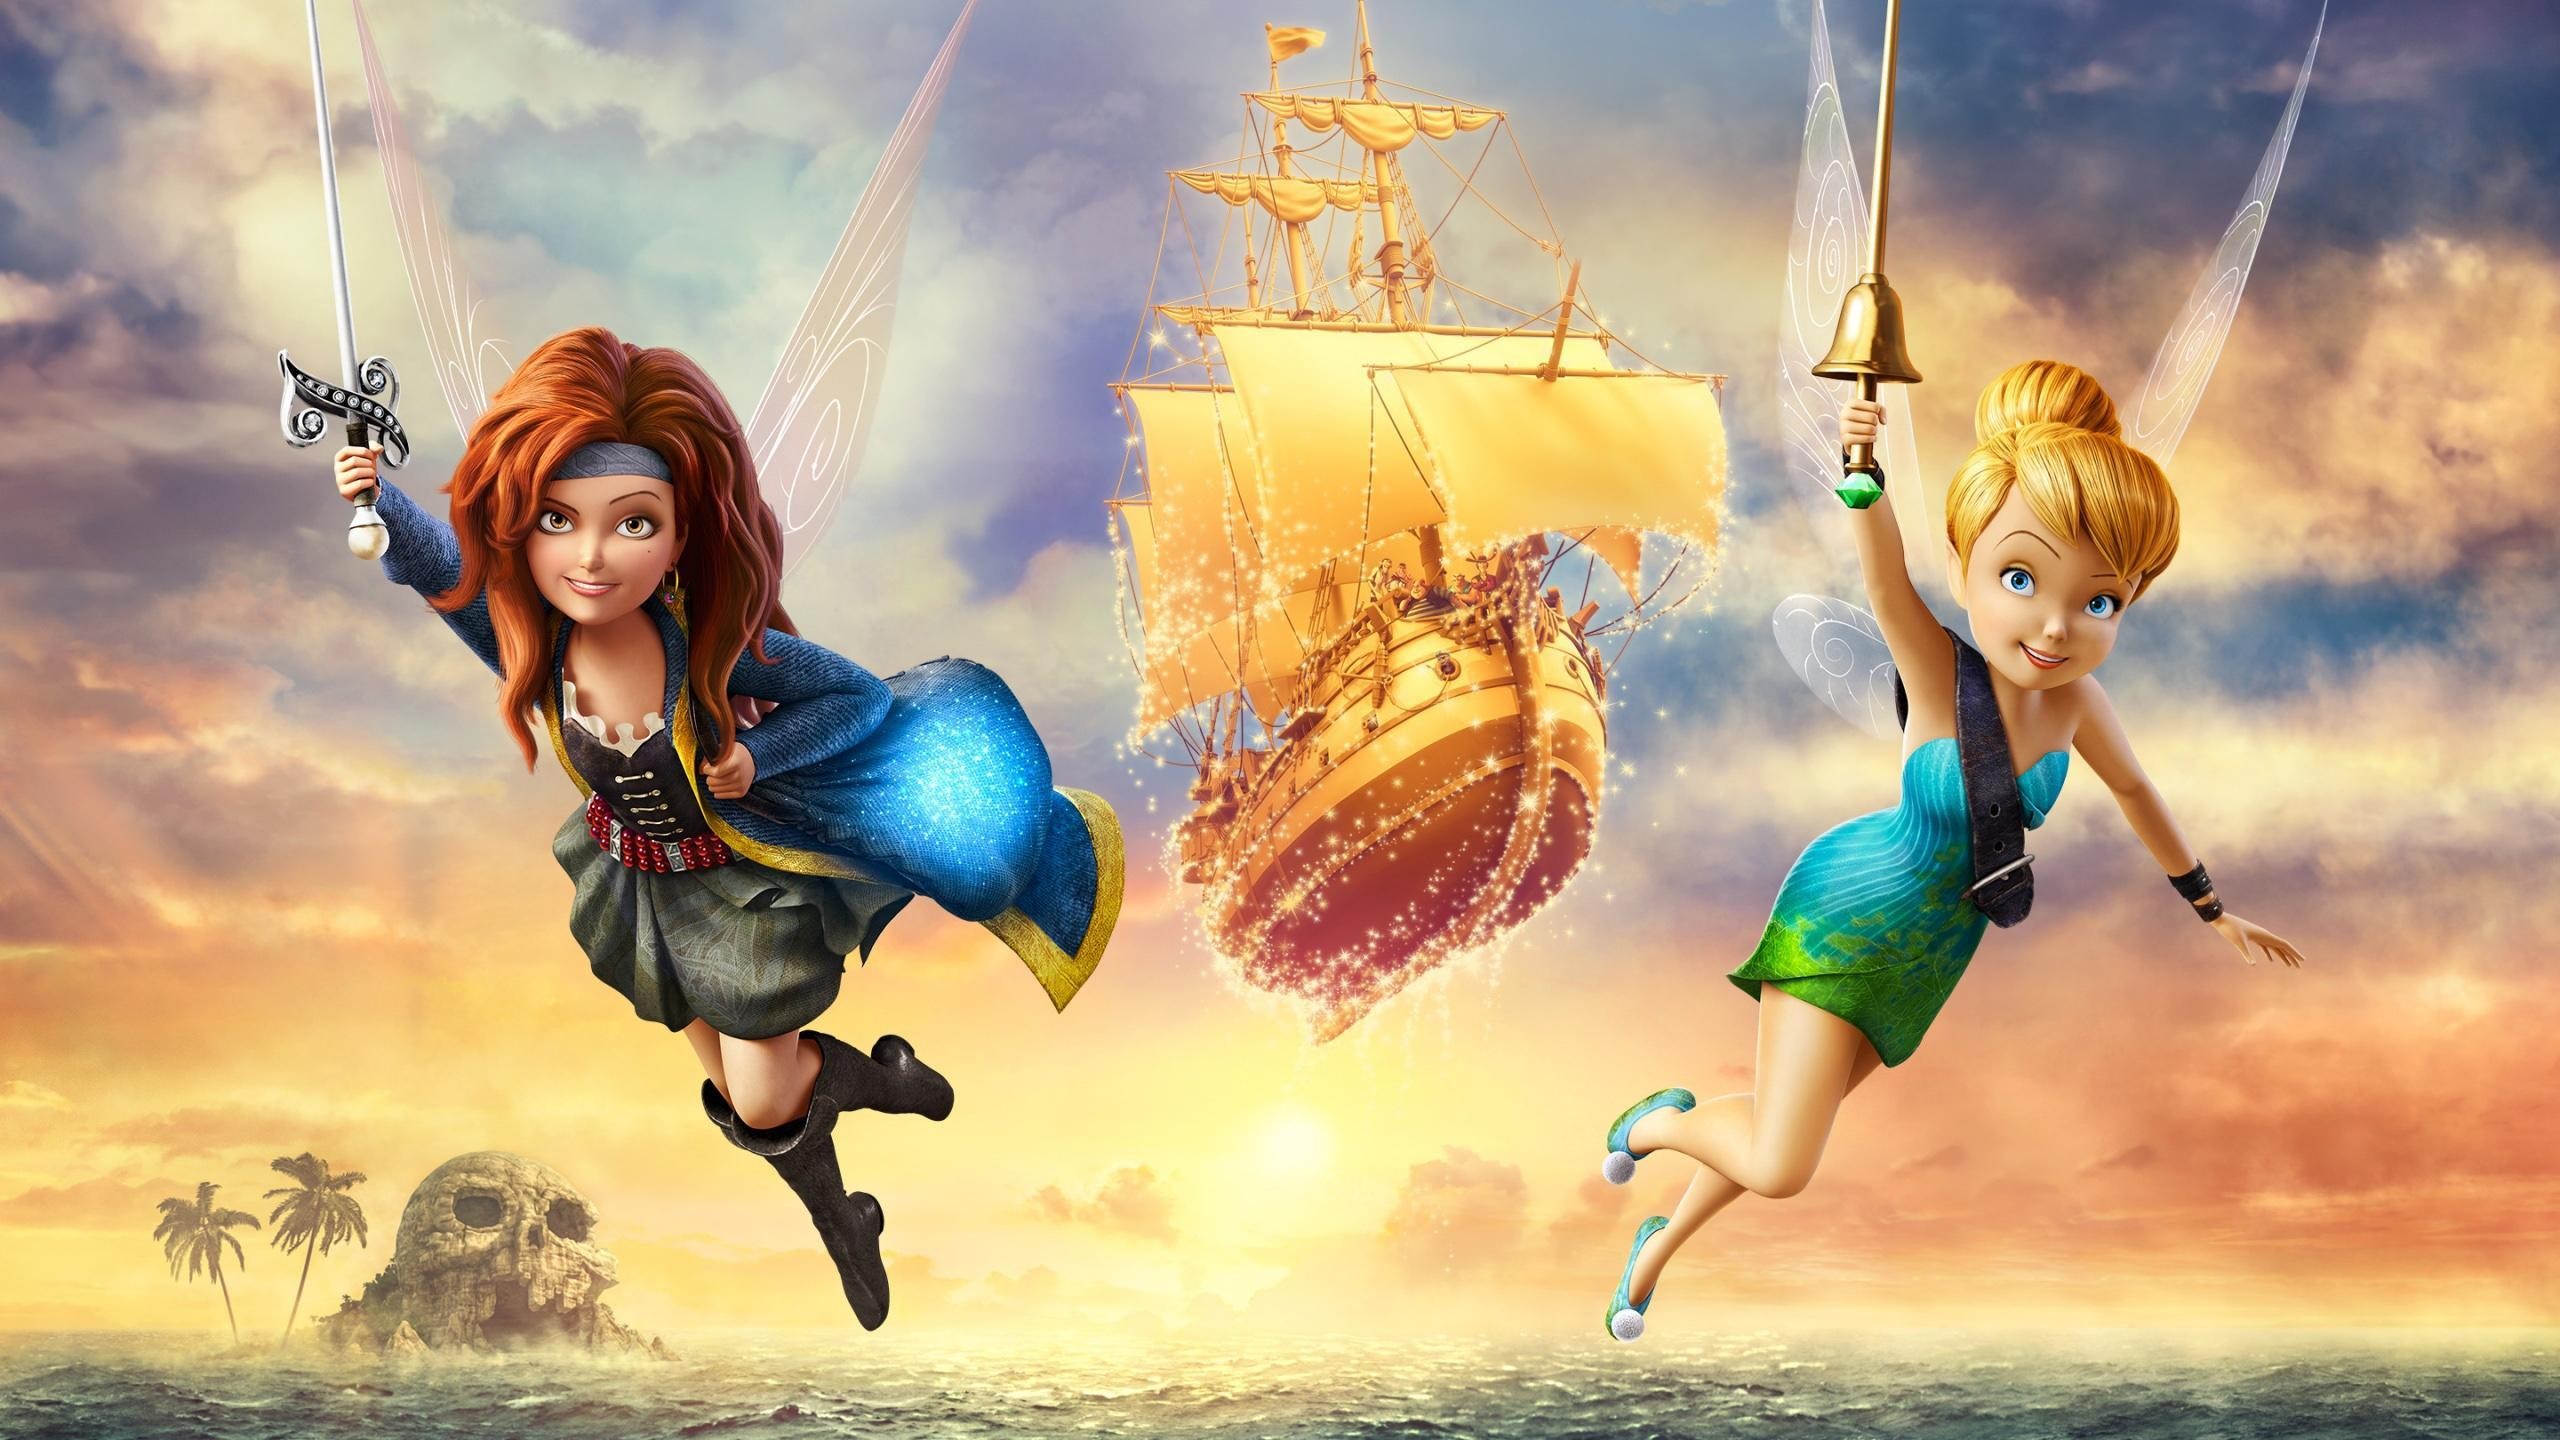 The Pirate Fairy Fairy Pirate Ship Tinker Bell 2560x1440